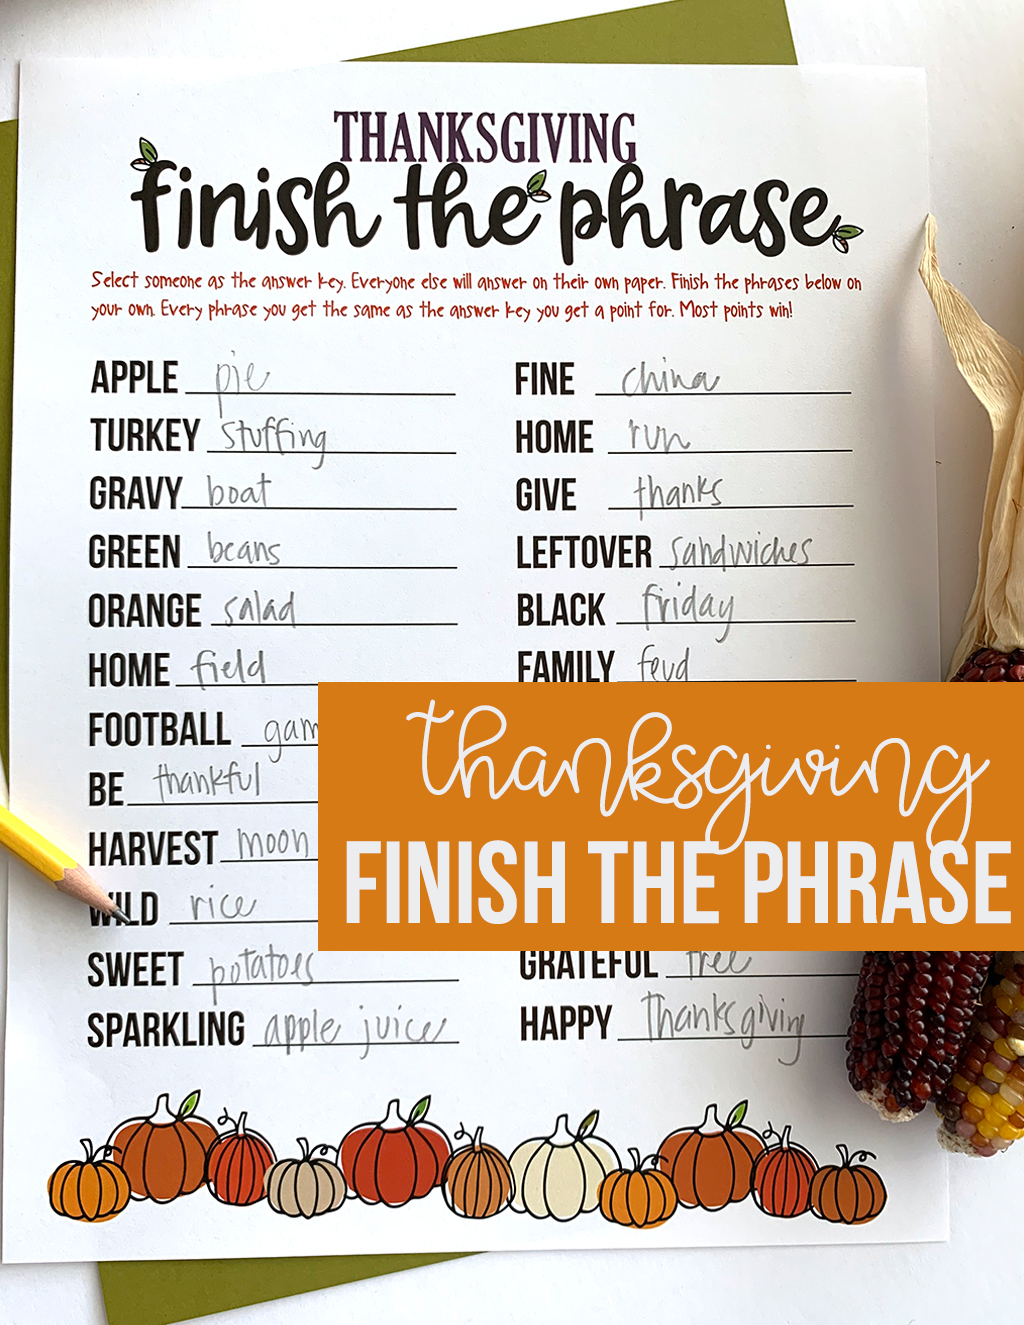 Thanksgiving Finish the Phrase Printable on a white background with green paper